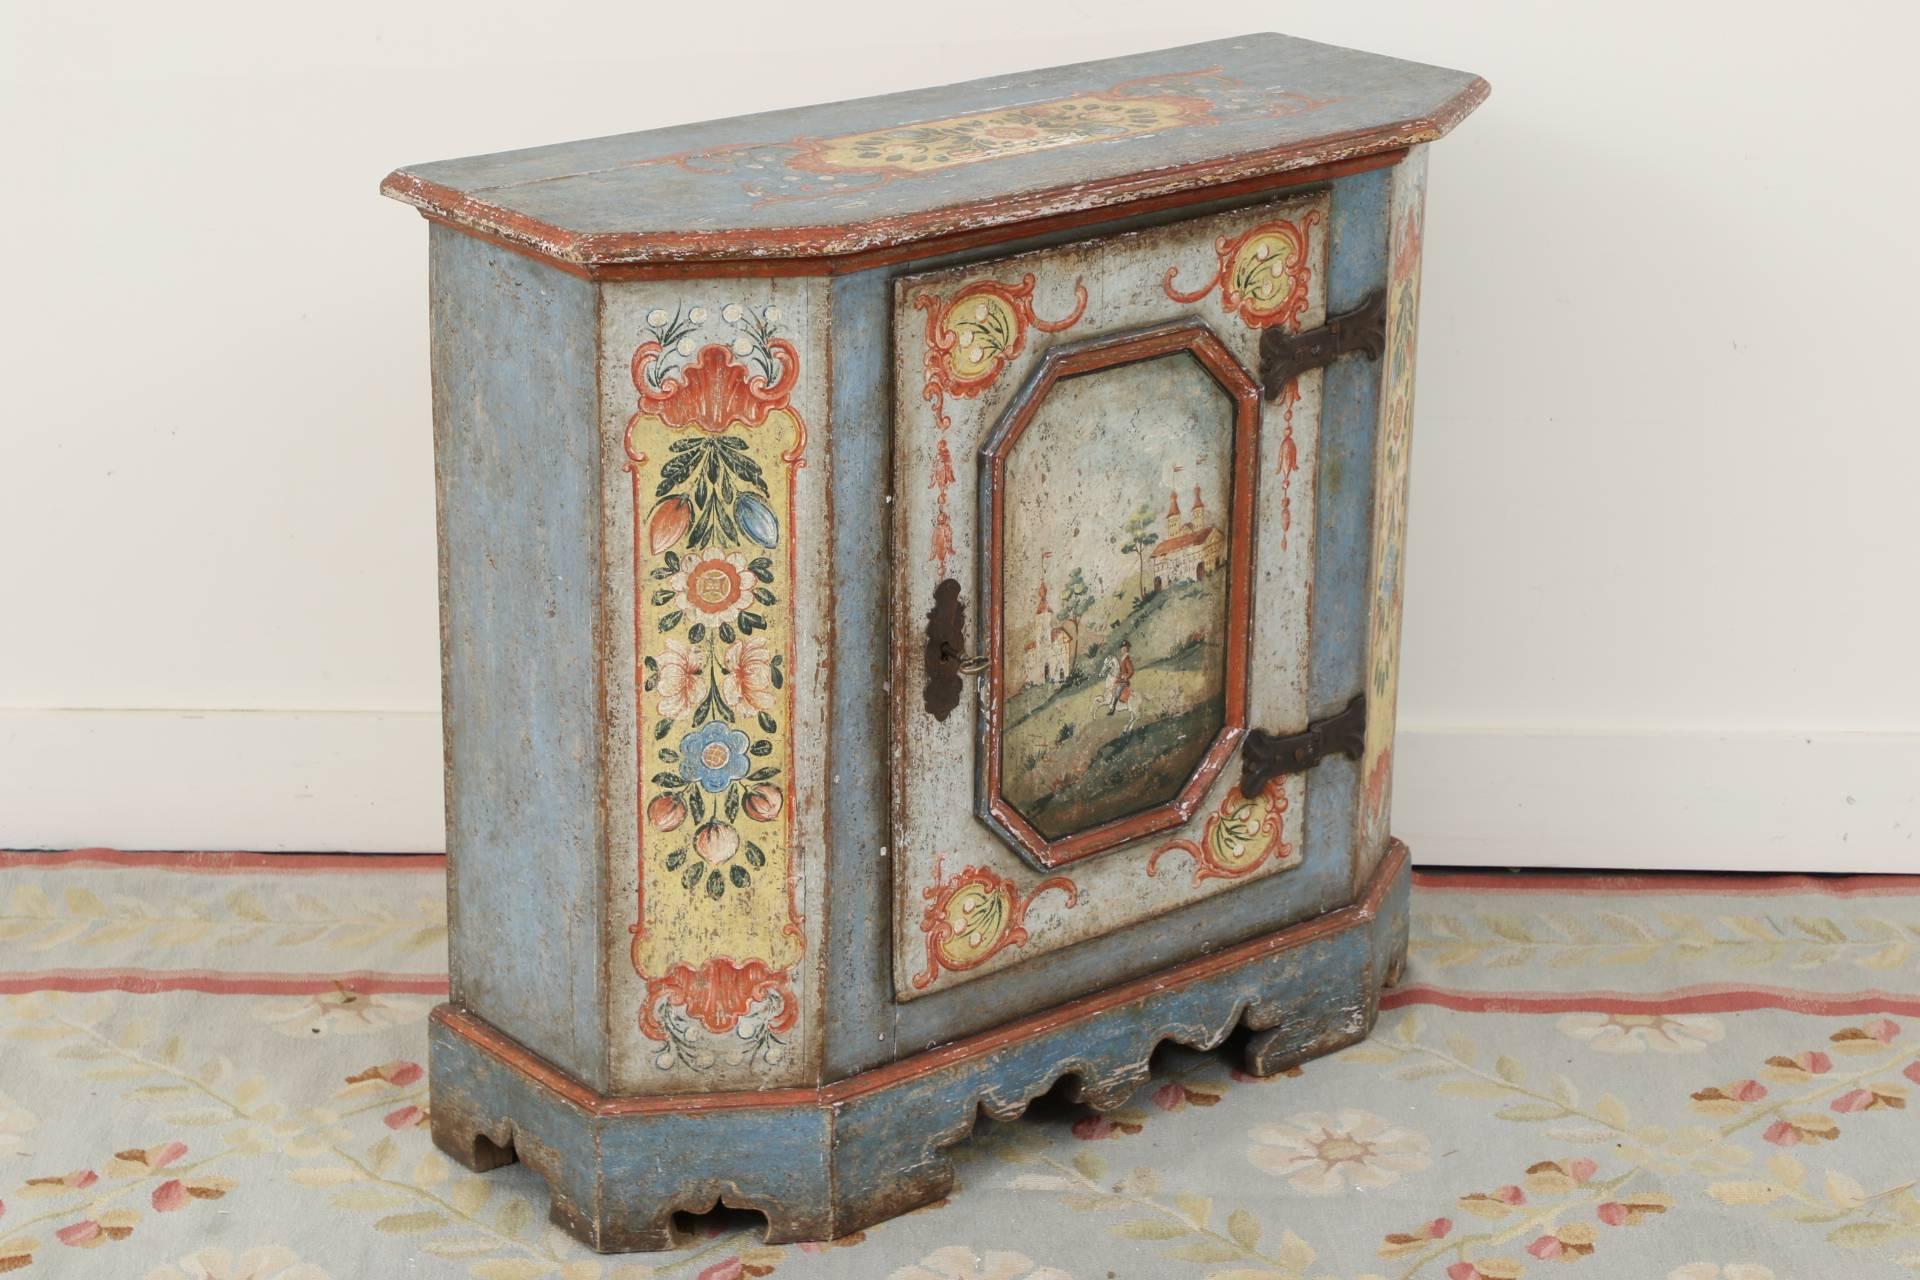 Rectangular with canted corners in blue paint with red edges. The top and front side panels with polychrome floral painted bands (perhaps painted later). The door with a centre angular panel decorated with a figure on horseback in a hilly landscape